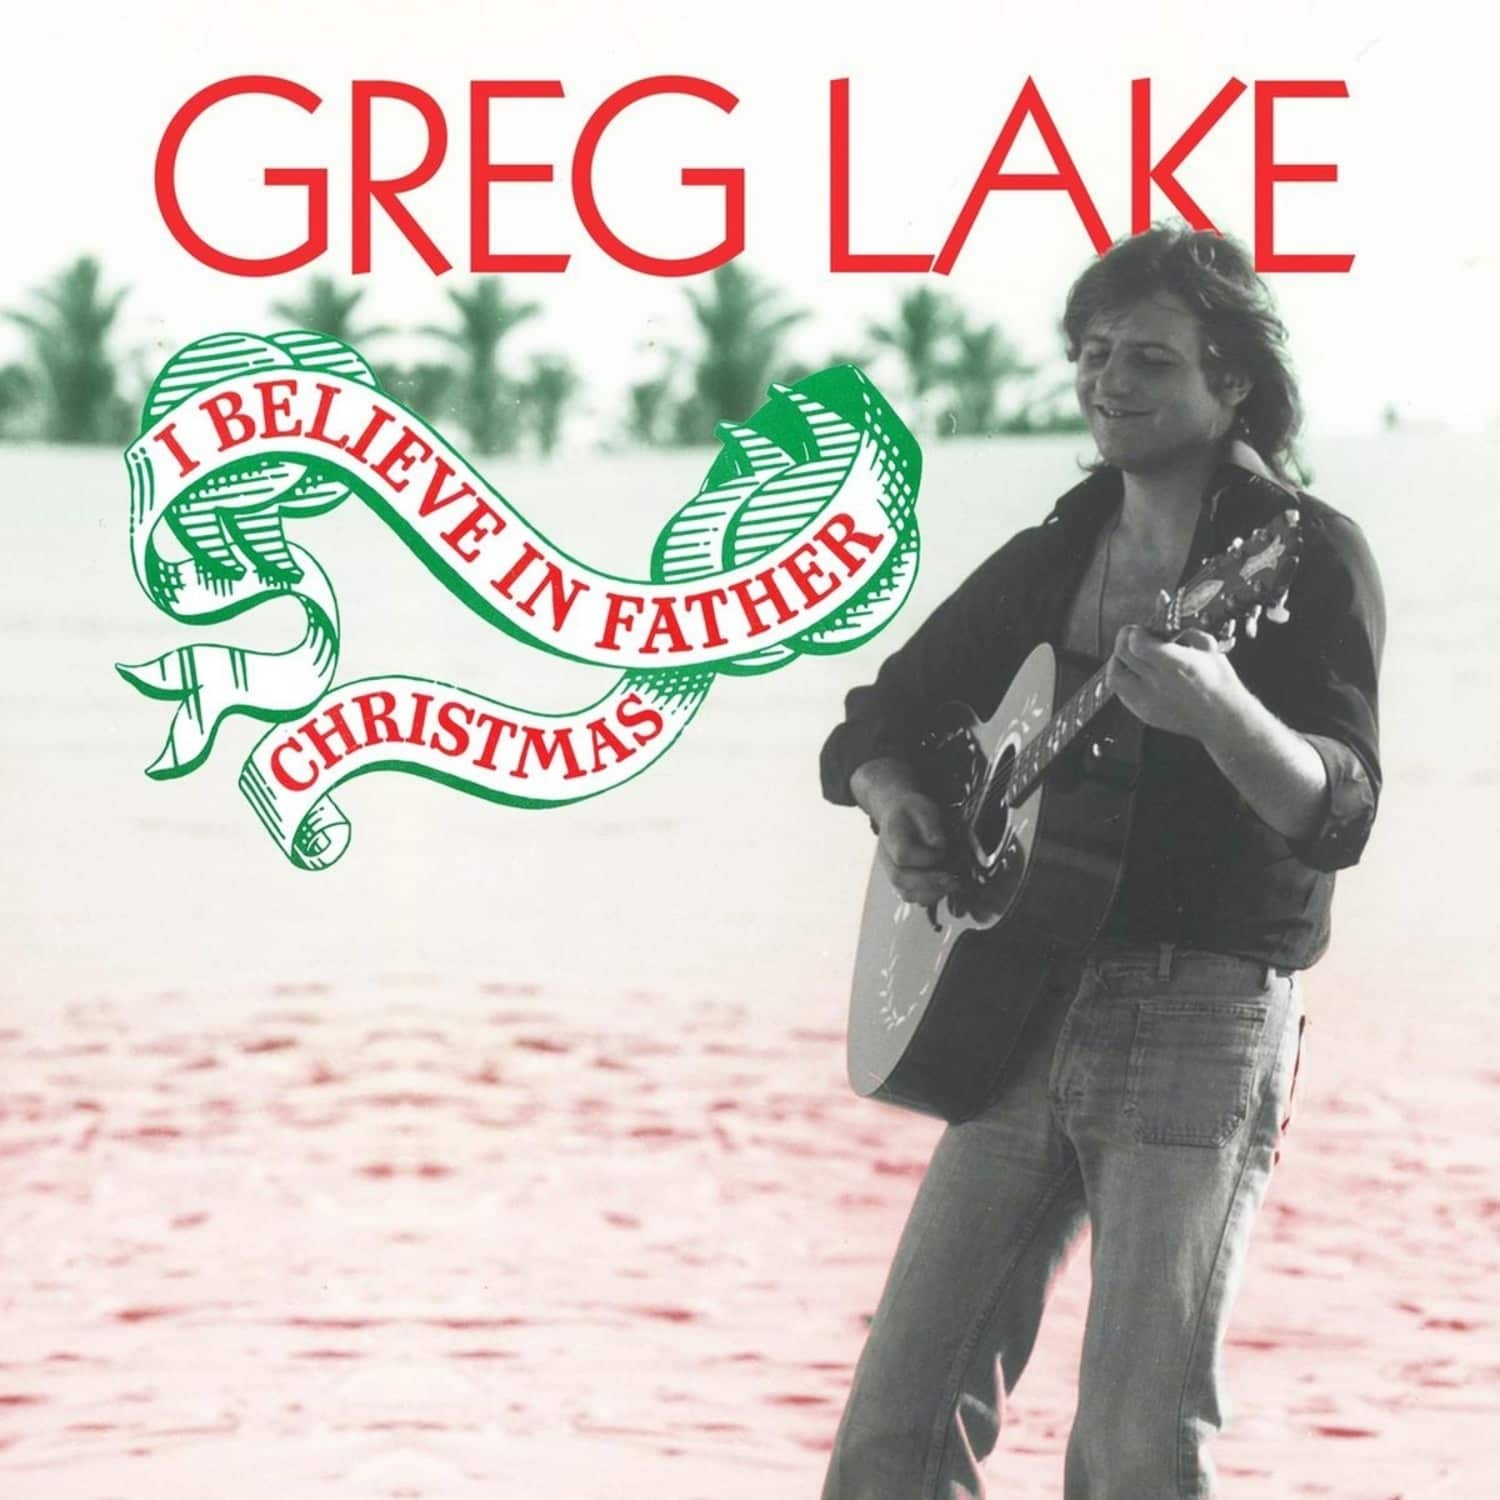 Gref Lake - I BELIEVE IN FATHER CHRISTMAS 